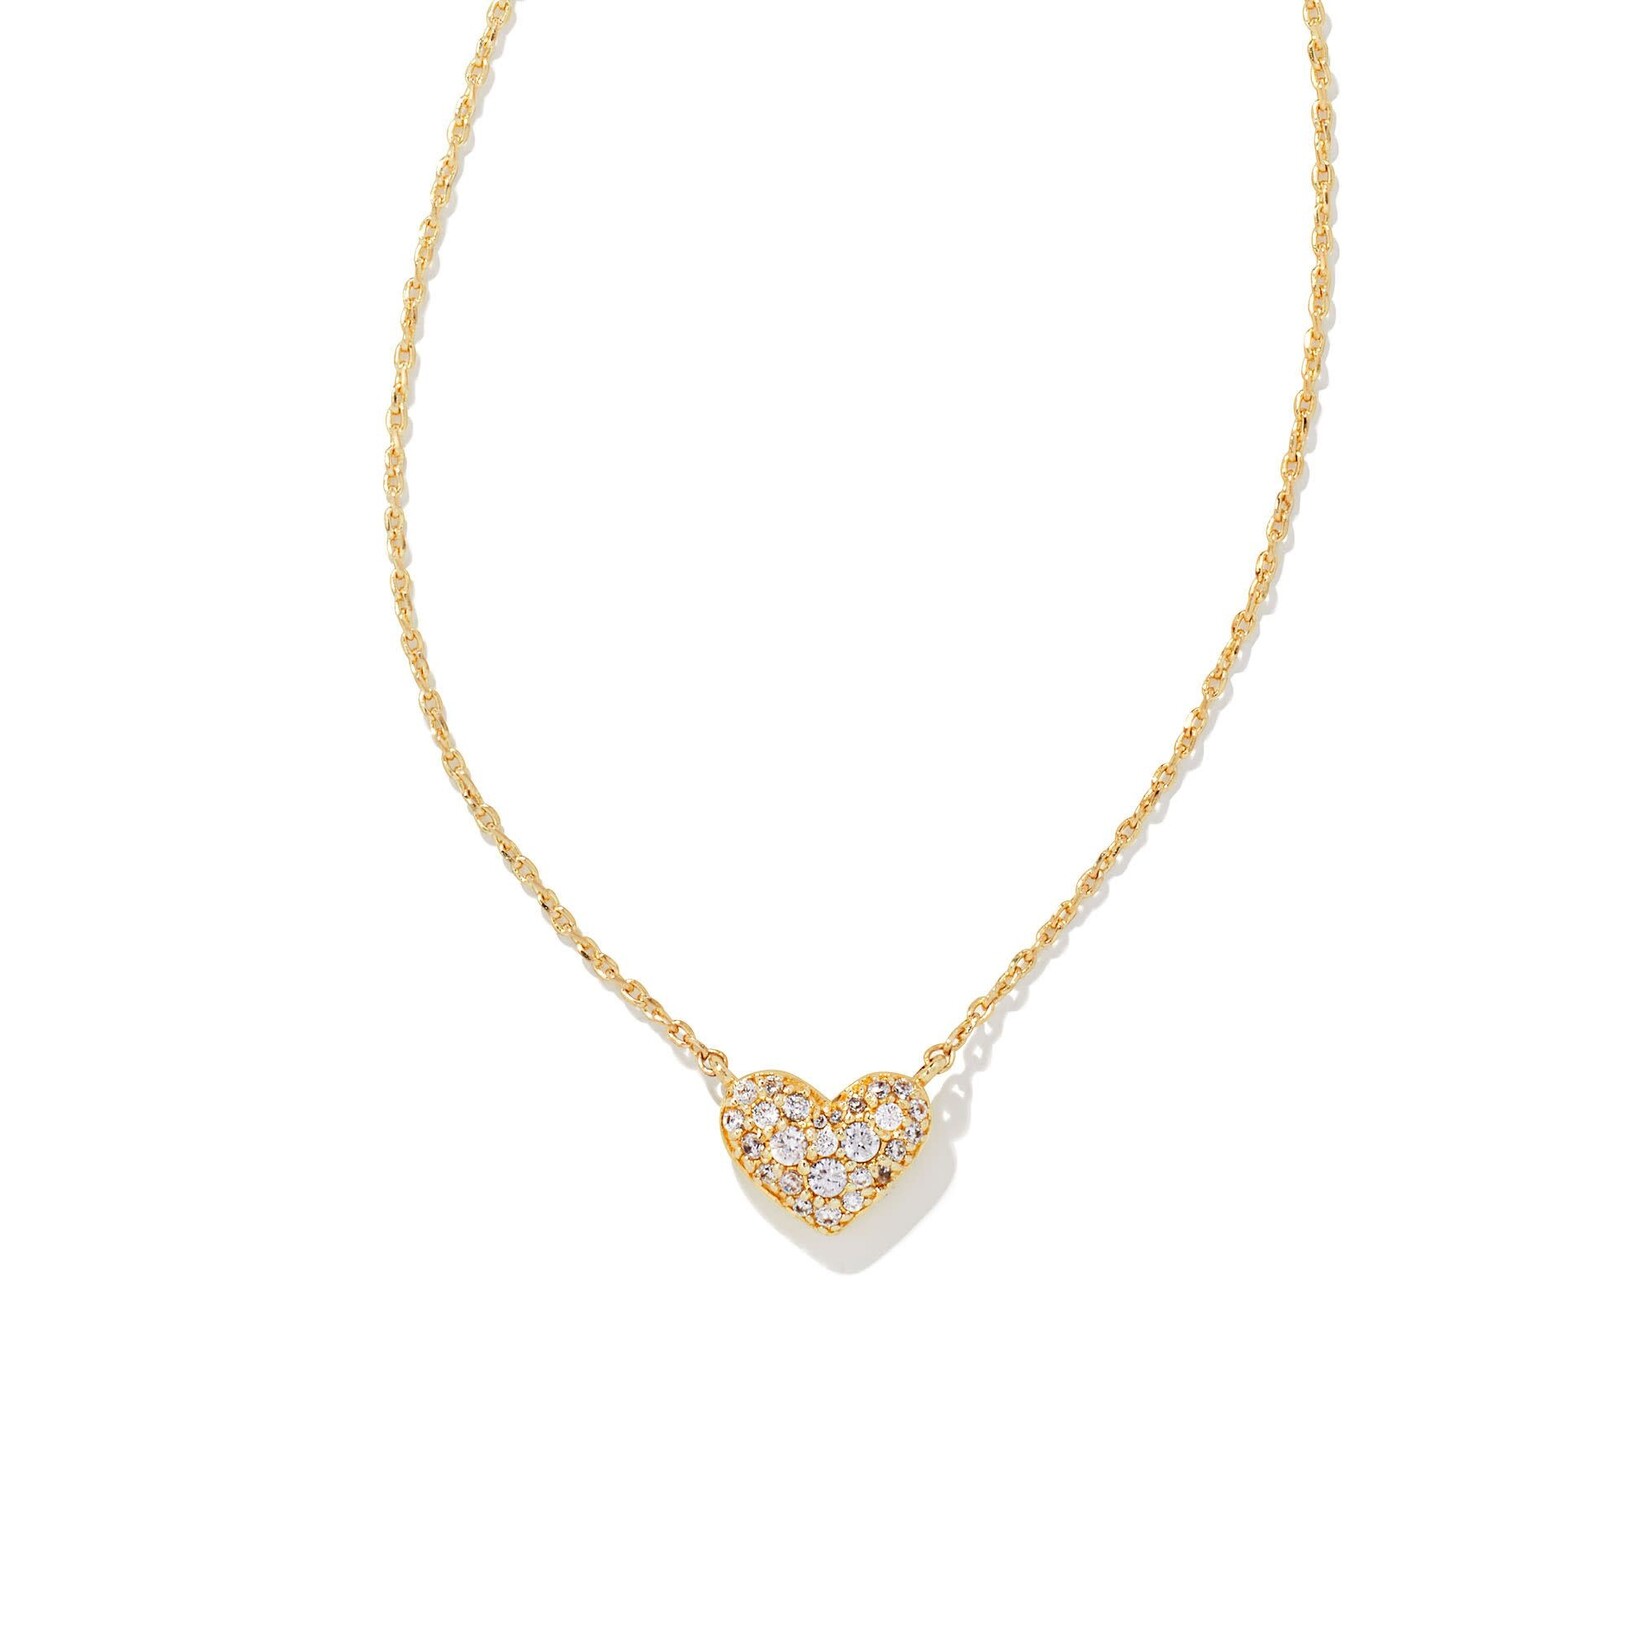 ARI CRYSTAL HEART PAVE NECKLACE